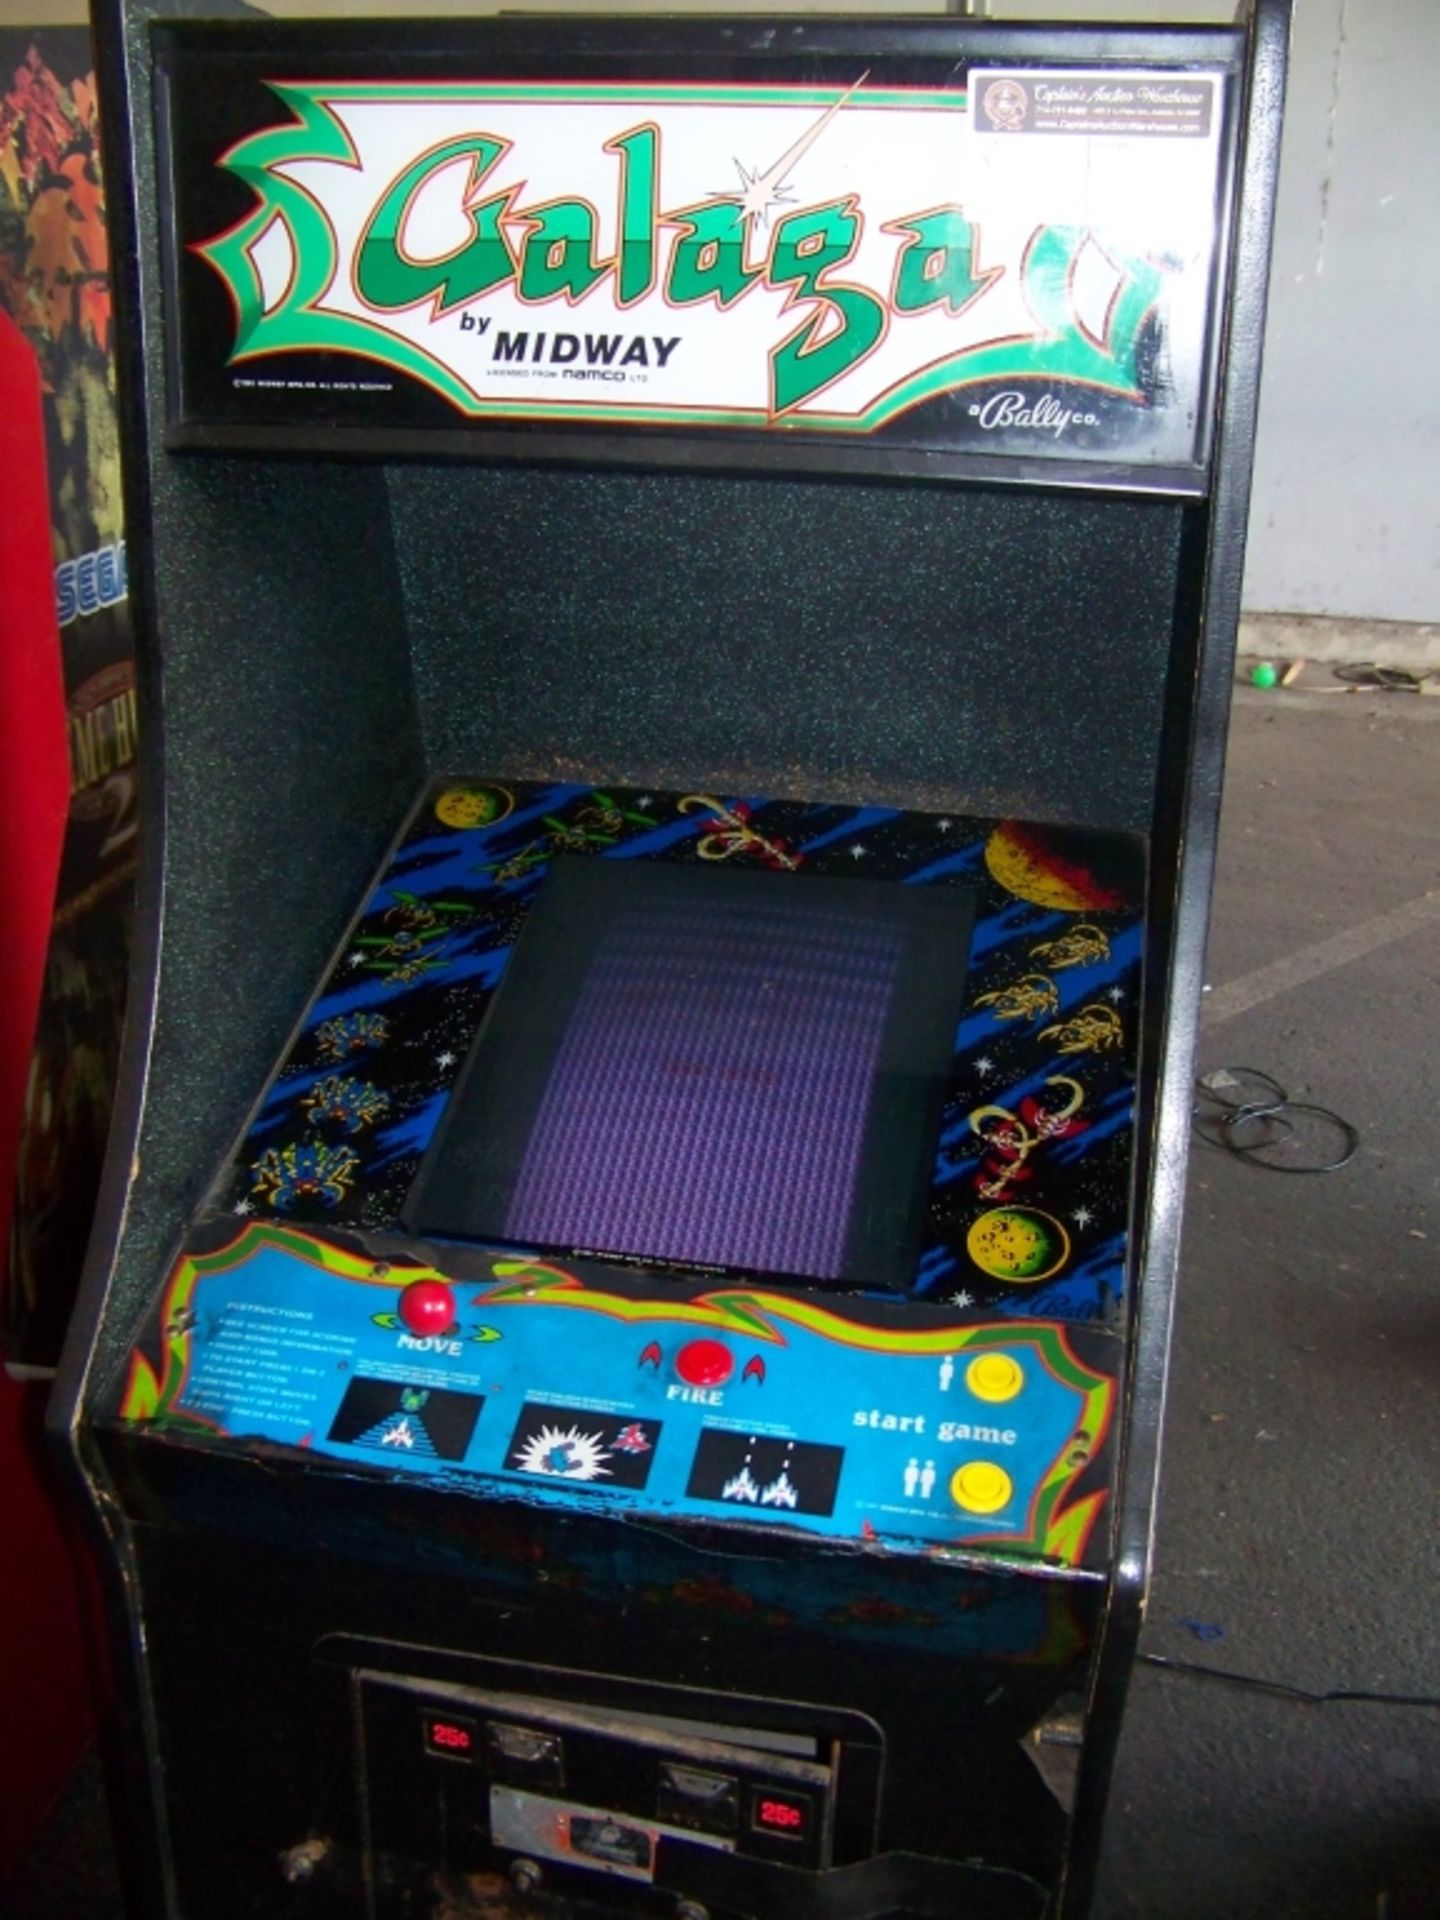 GALAGA UPRIGHT 19" CLASSIC ARCADE GAME MIDWAY - Image 3 of 3